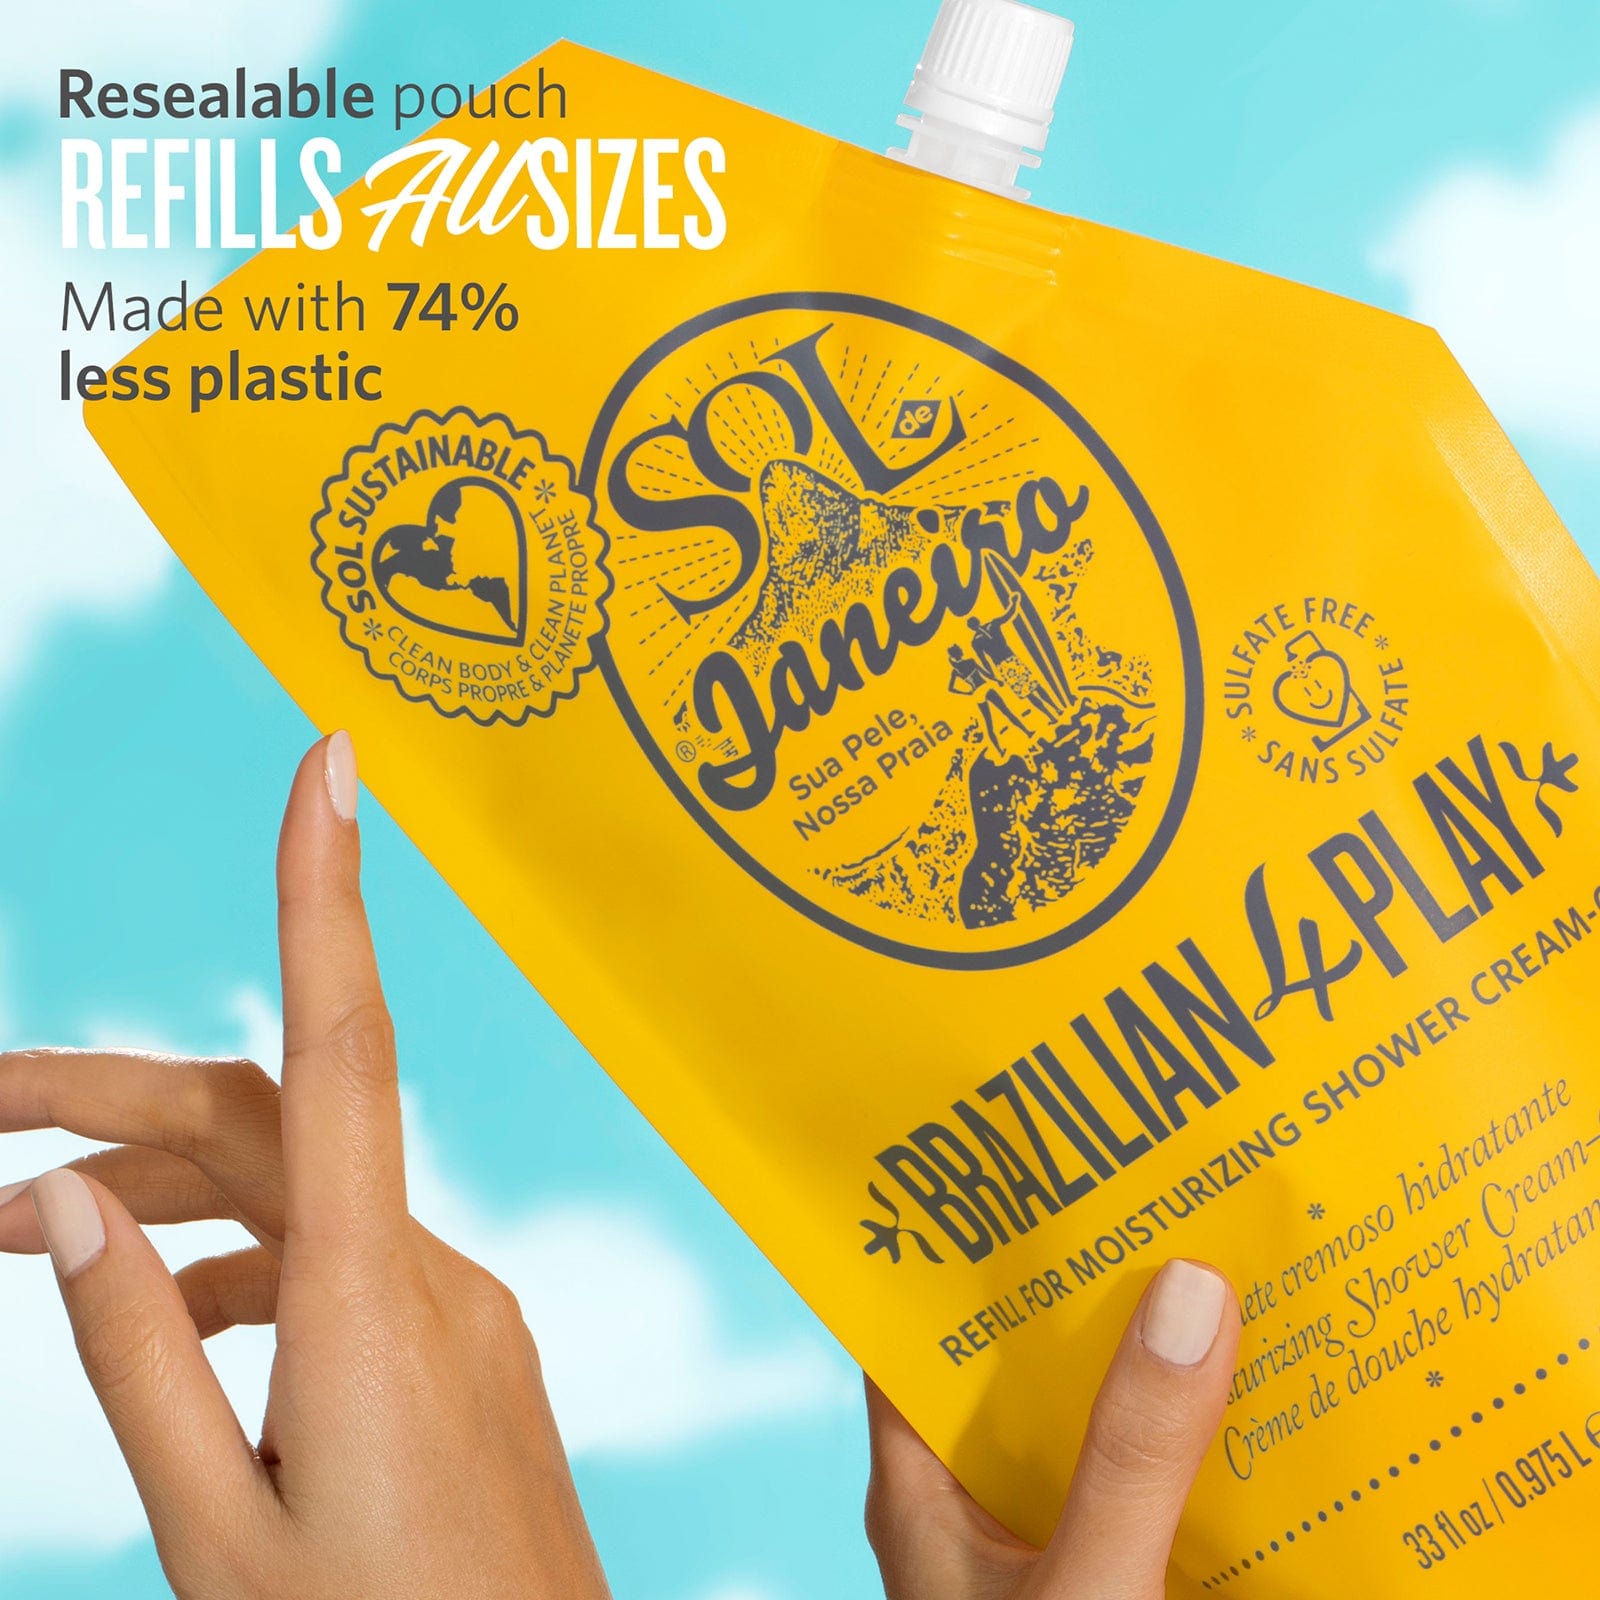 Resealable pouch refills all sizes. made with 74% less plastic | Brazilian 4 Play Moisturizing Shower Cream-Gel 1 liter Refill pouch | Sol de janeiro